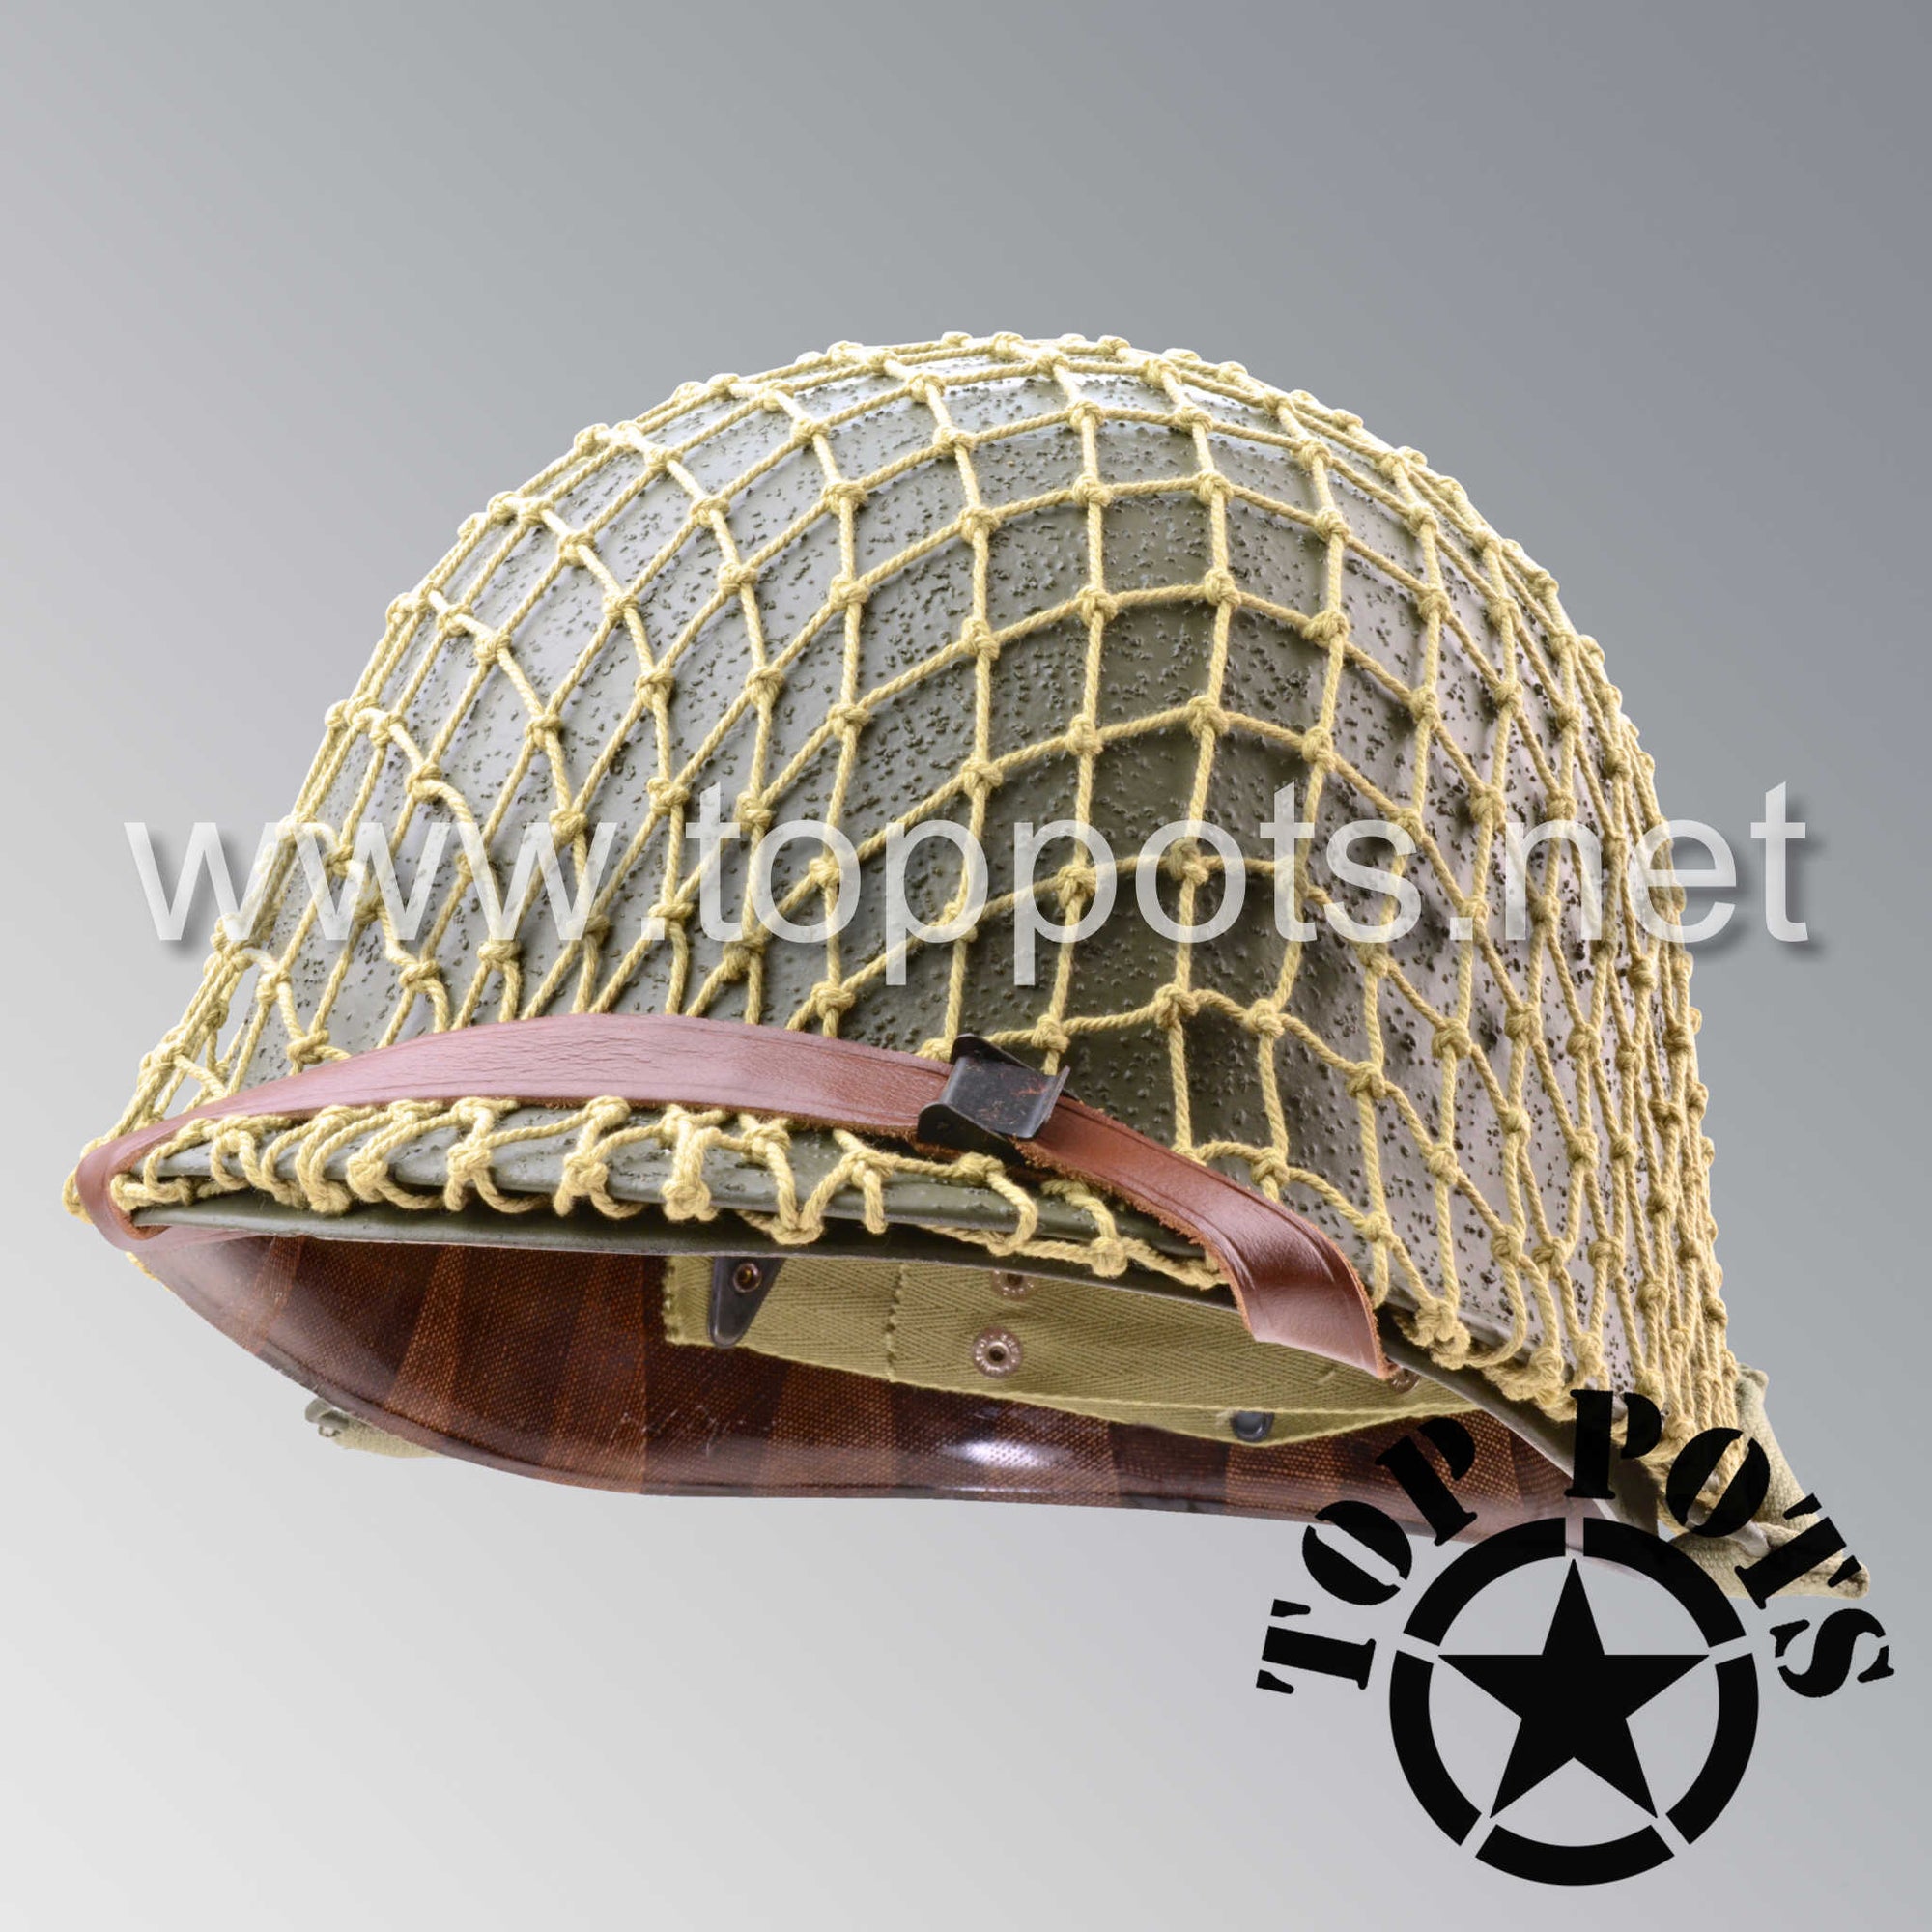 WWII US Army Restored Original M1 Infantry Helmet Swivel Bale Schlueter Shell and Liner with Khaki Net